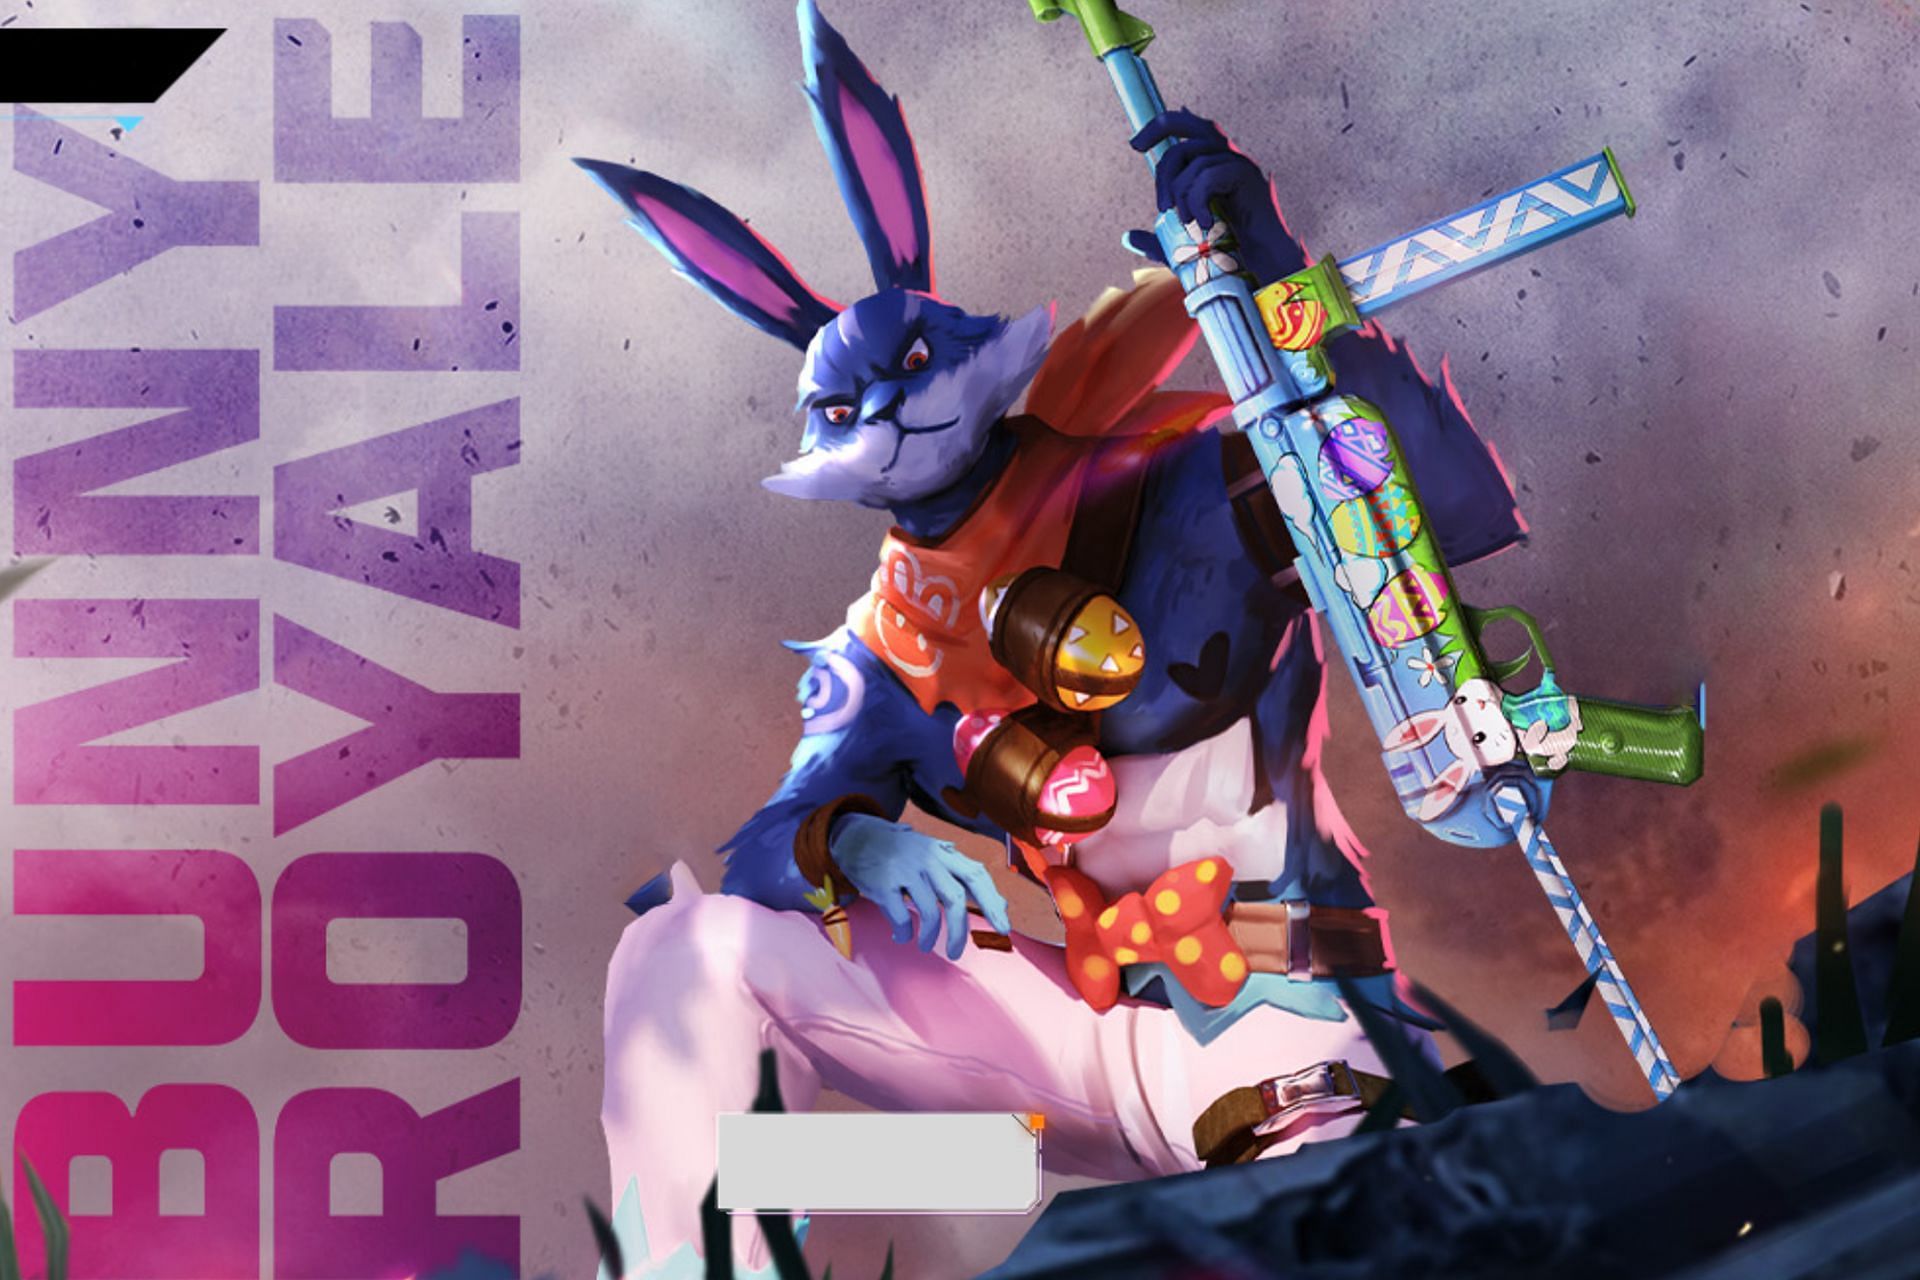 New Bunny Royale event has started in the game (Image via Garena)